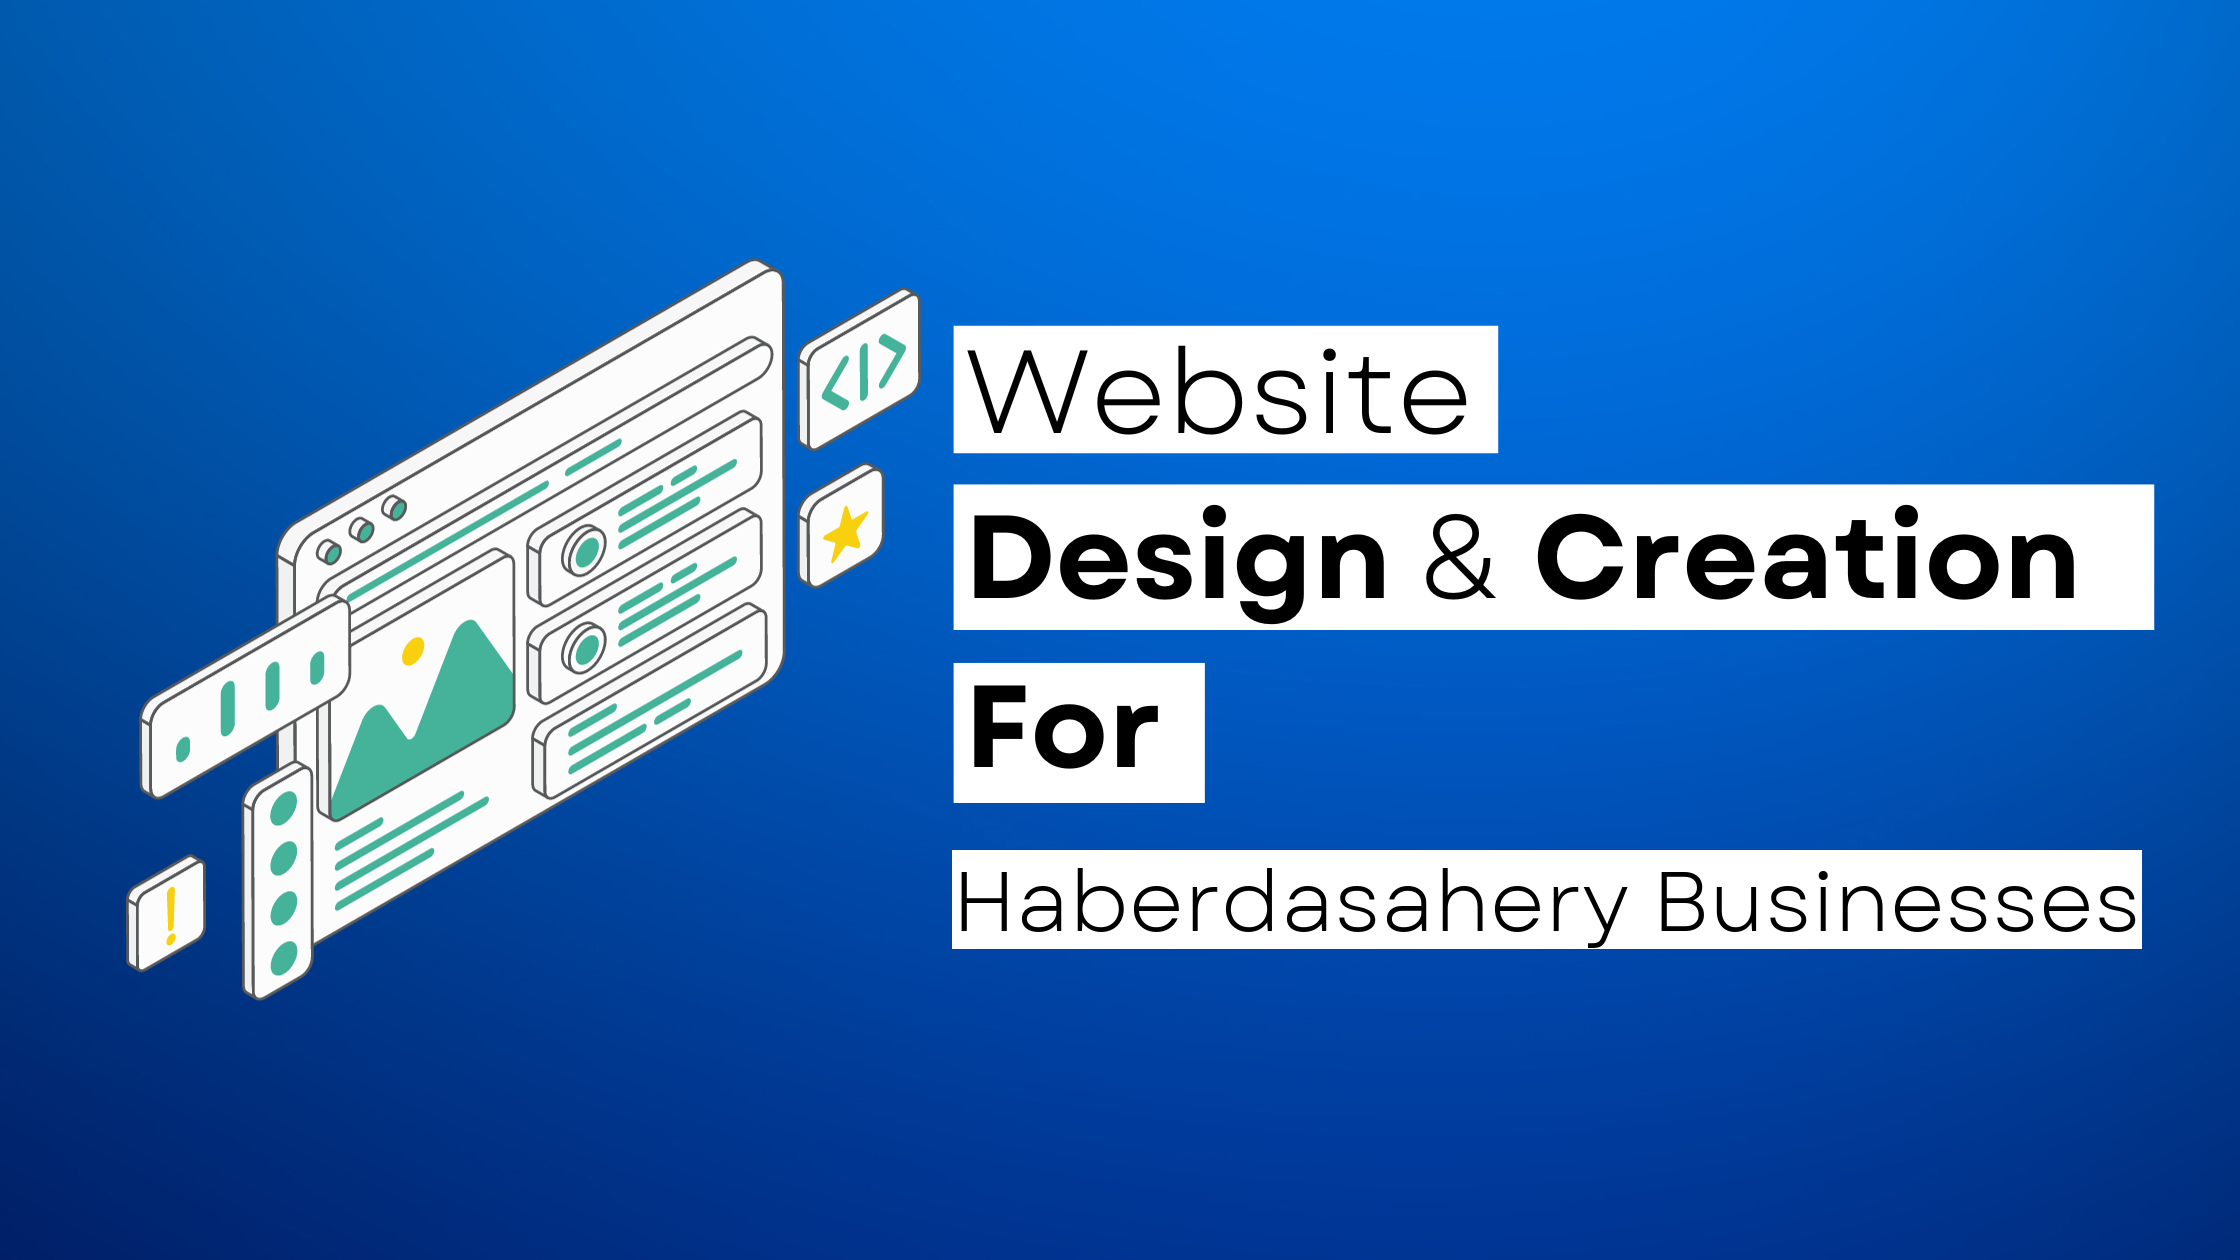 How to start a Haberdasahery  website